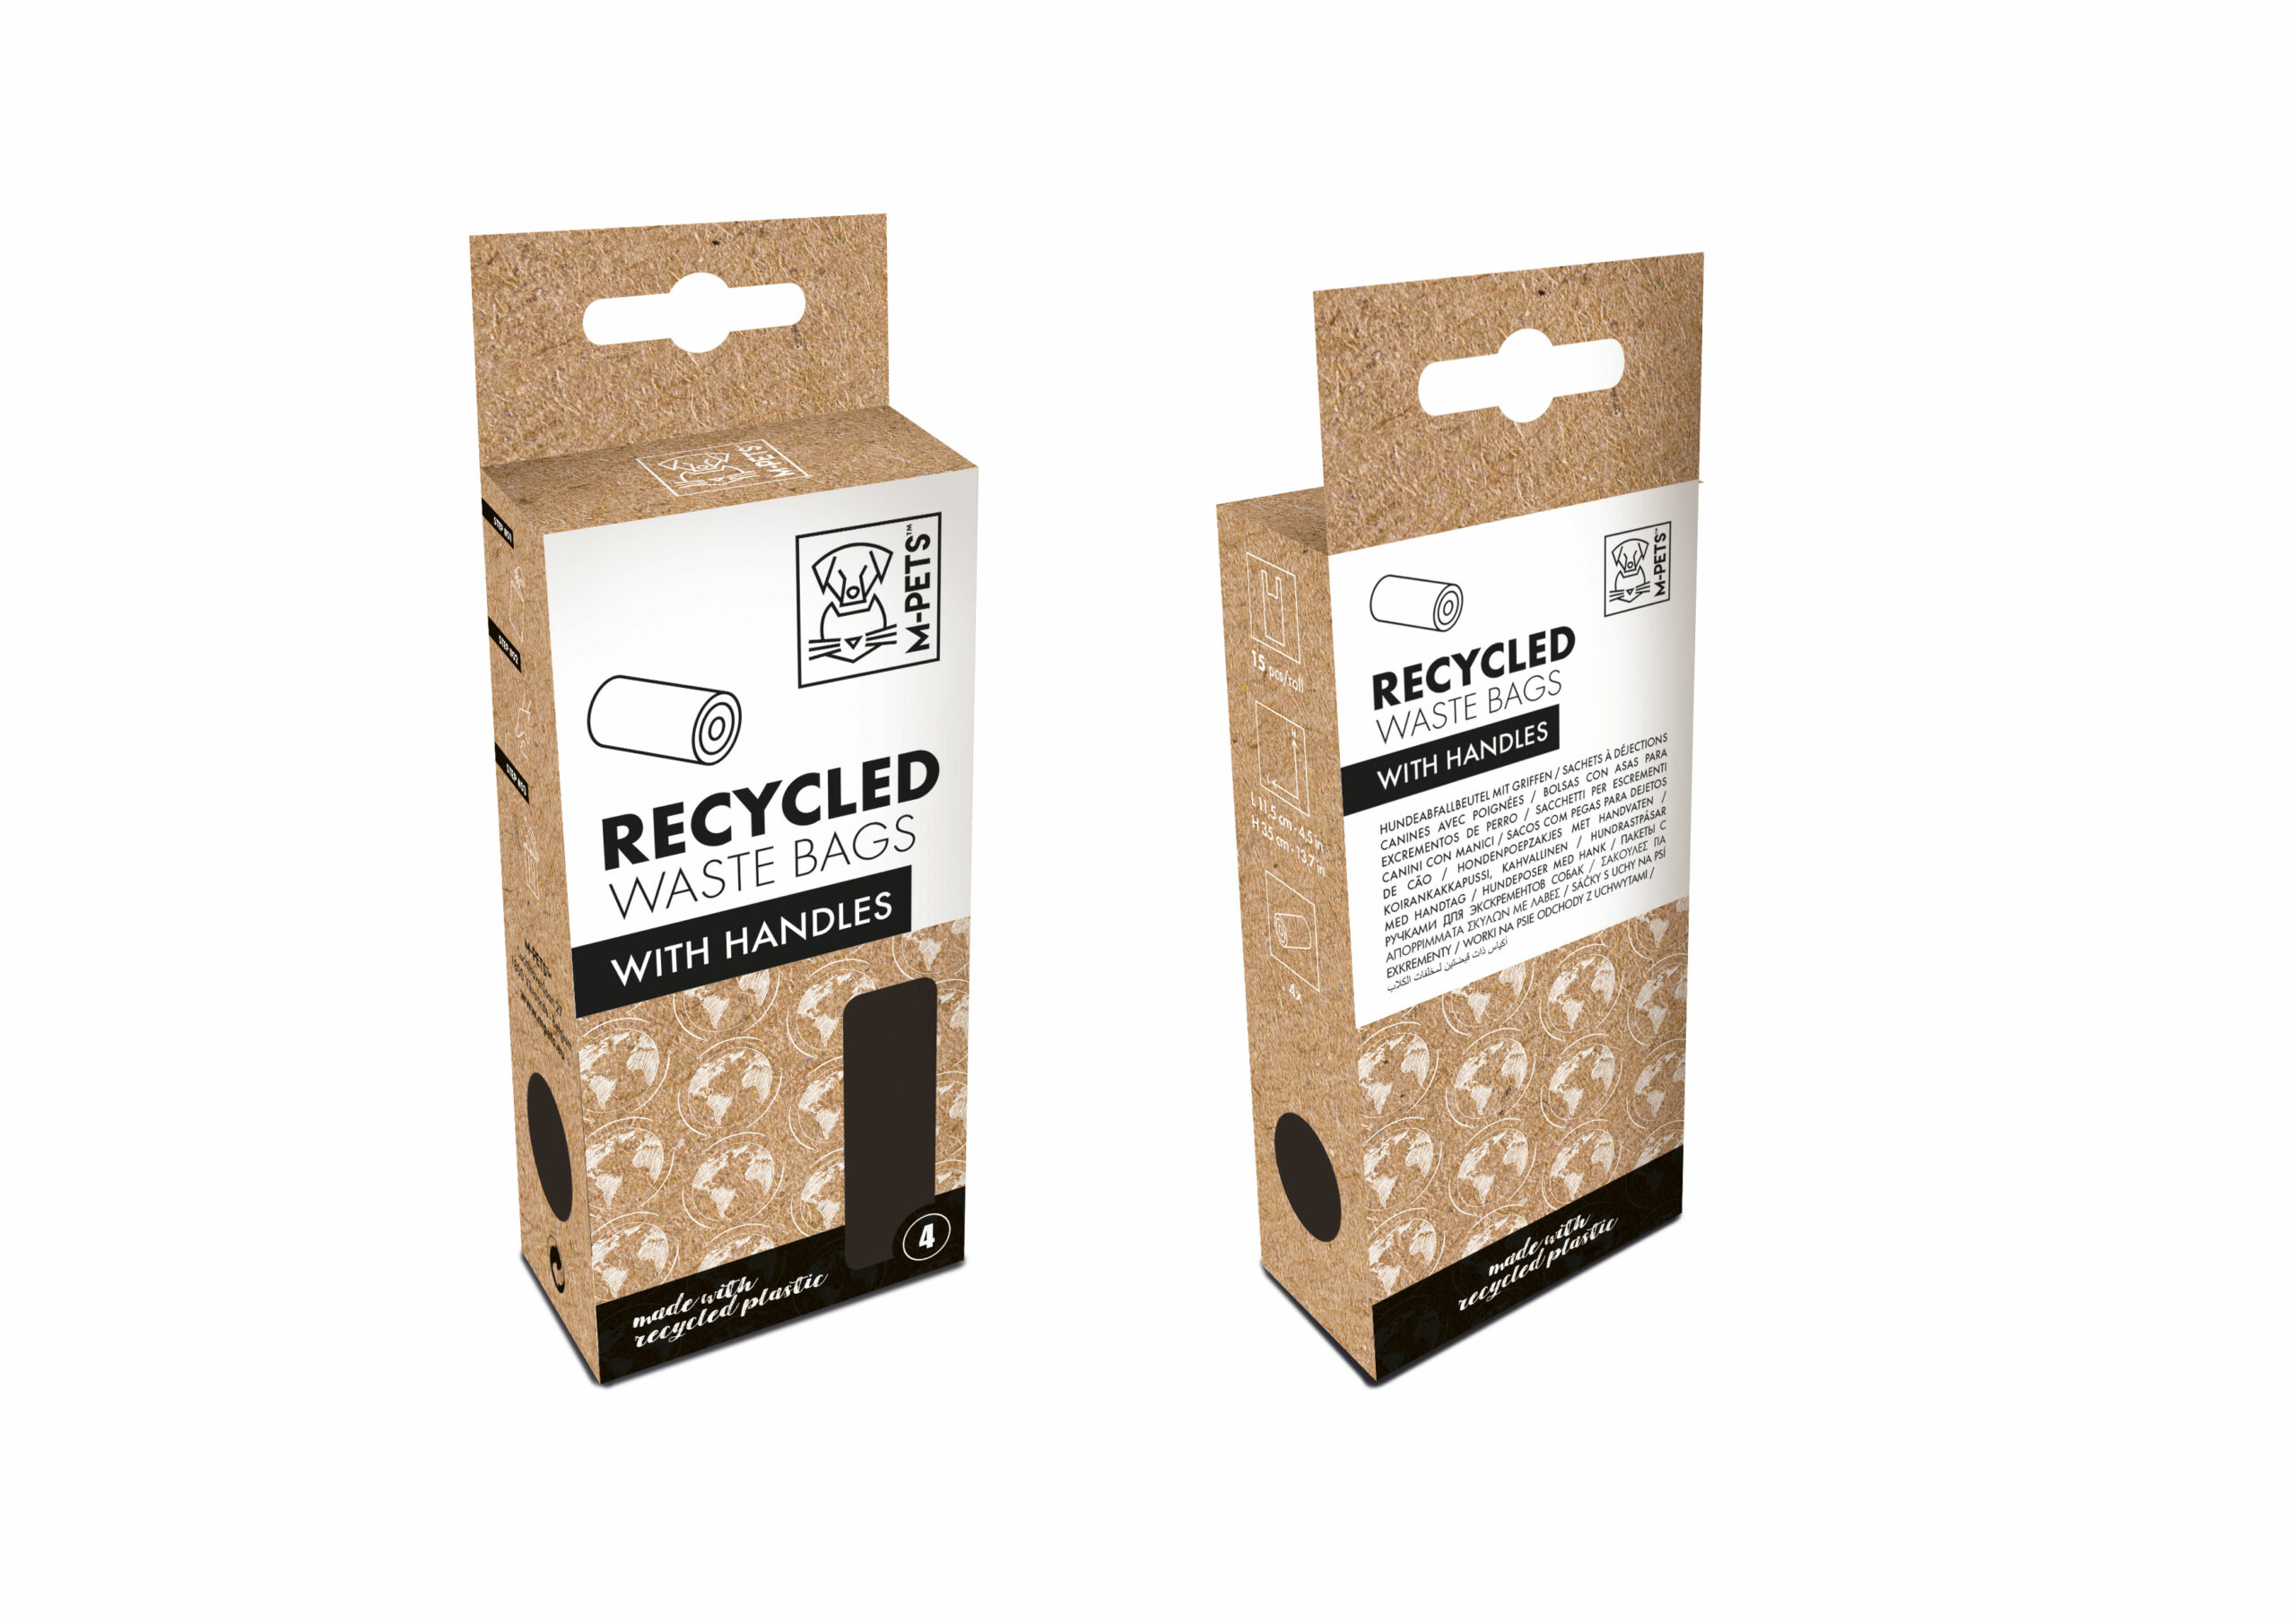 M-PETS_10113508-Recycled-Waste-bags-BOX-sim-#01